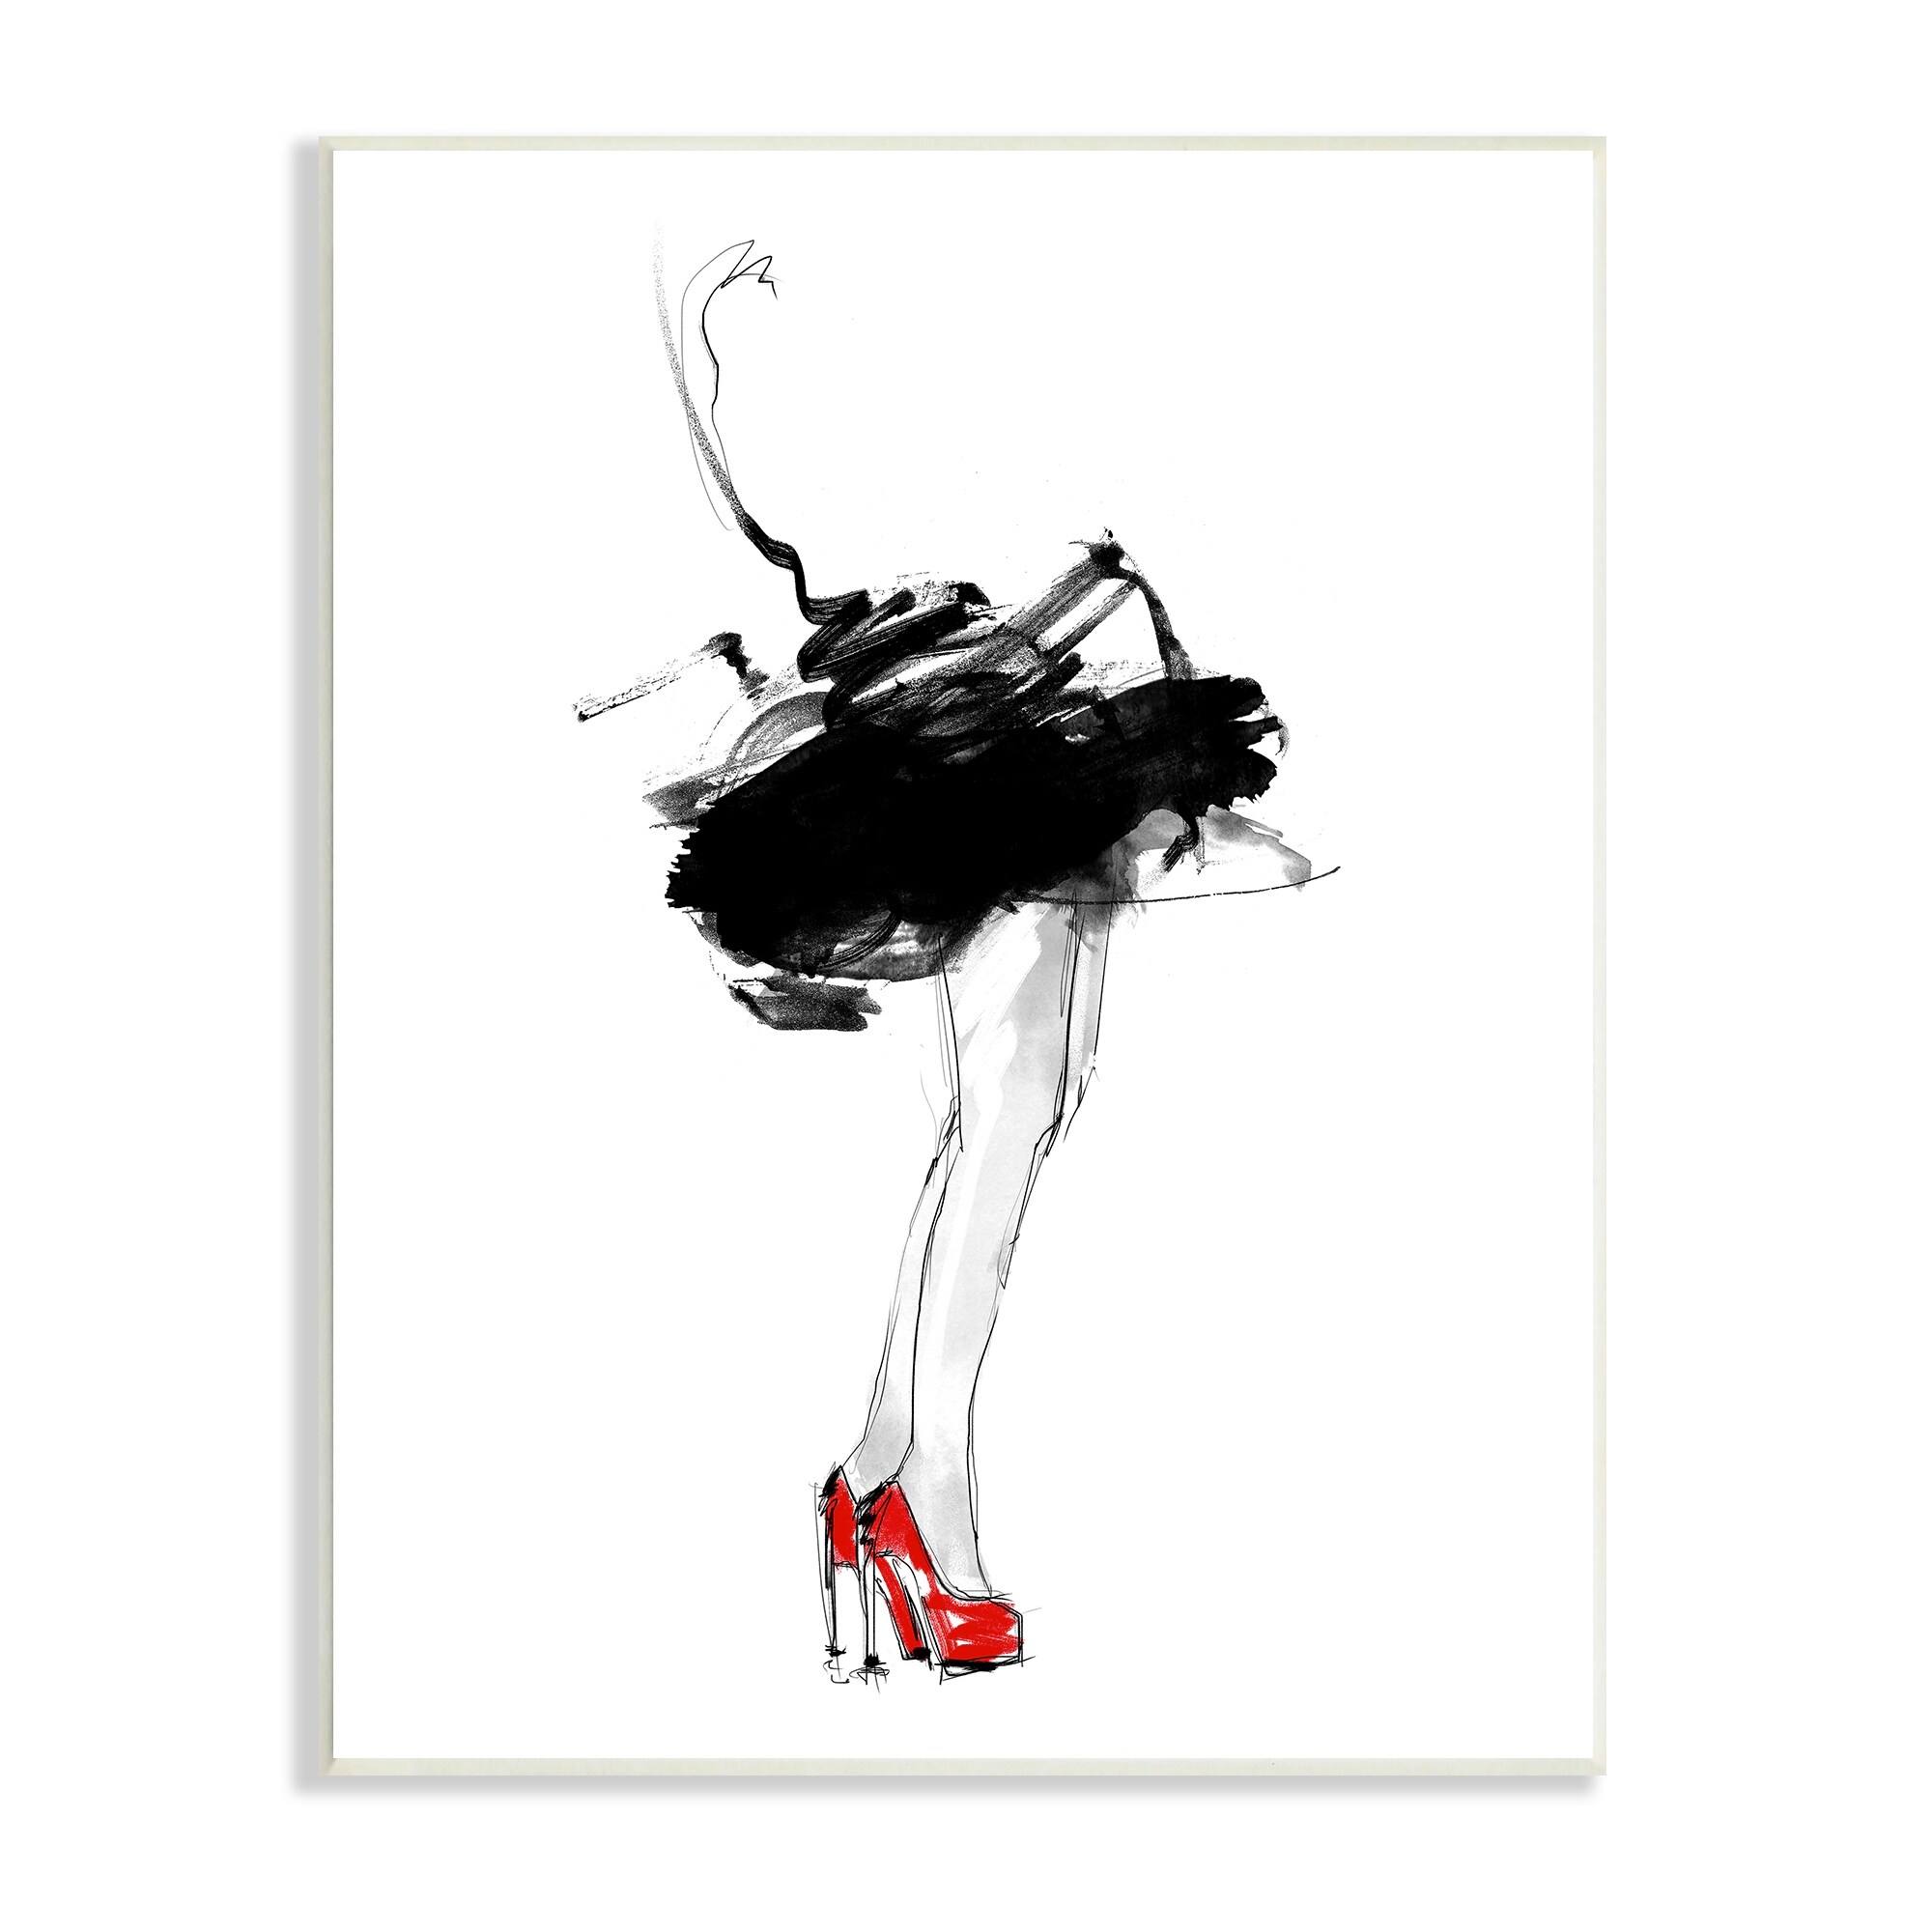 The Stupell Home Decor Collection Glam Fashion Book Stack Grey Bow Pump Heels Ink Oversized Wall Plaque Art